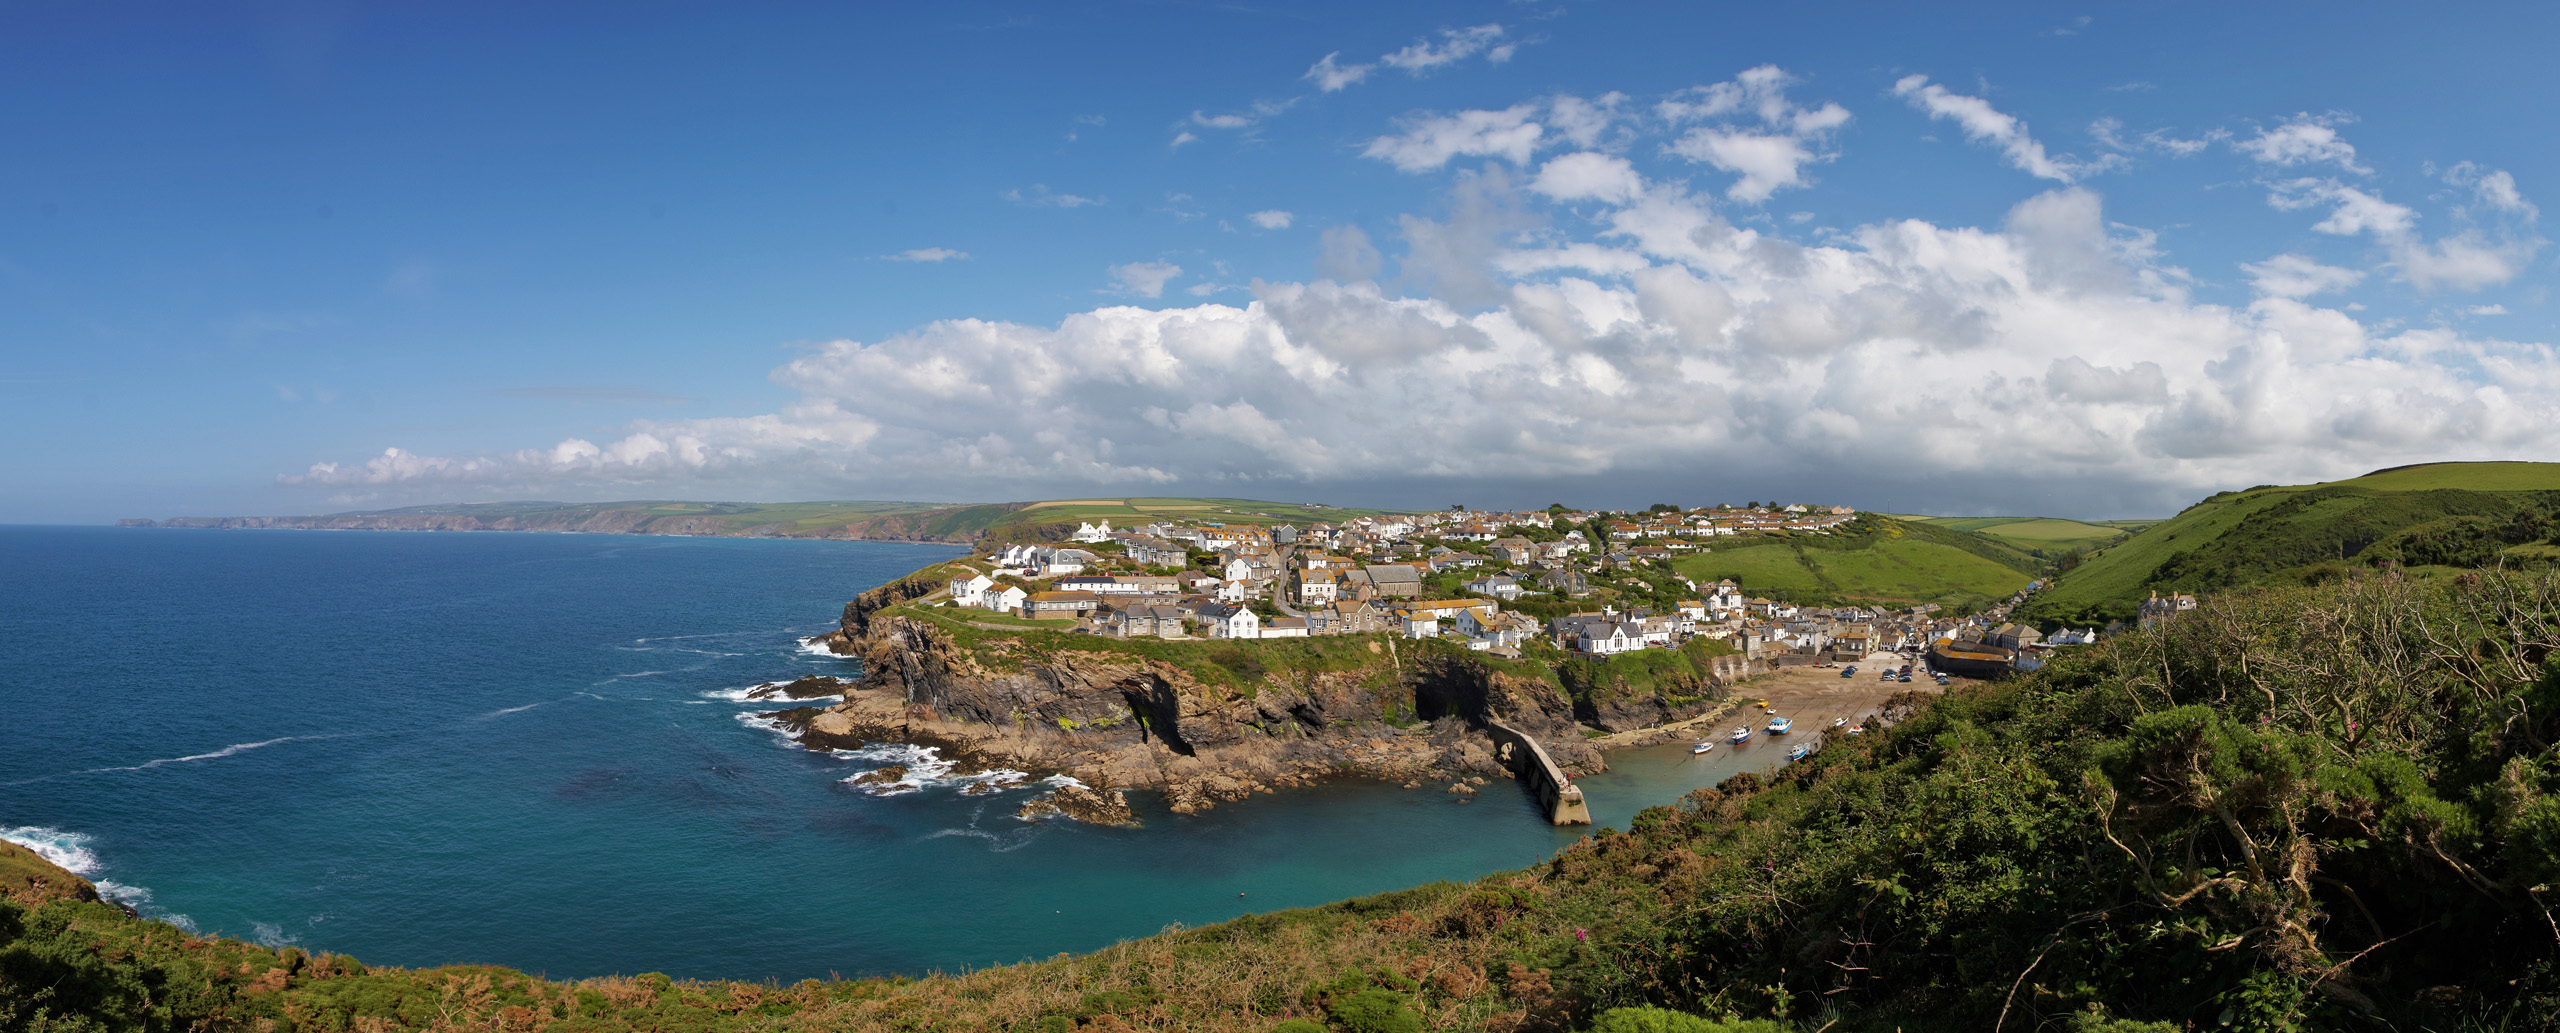 Port Isaac From The Cliffs Panorama